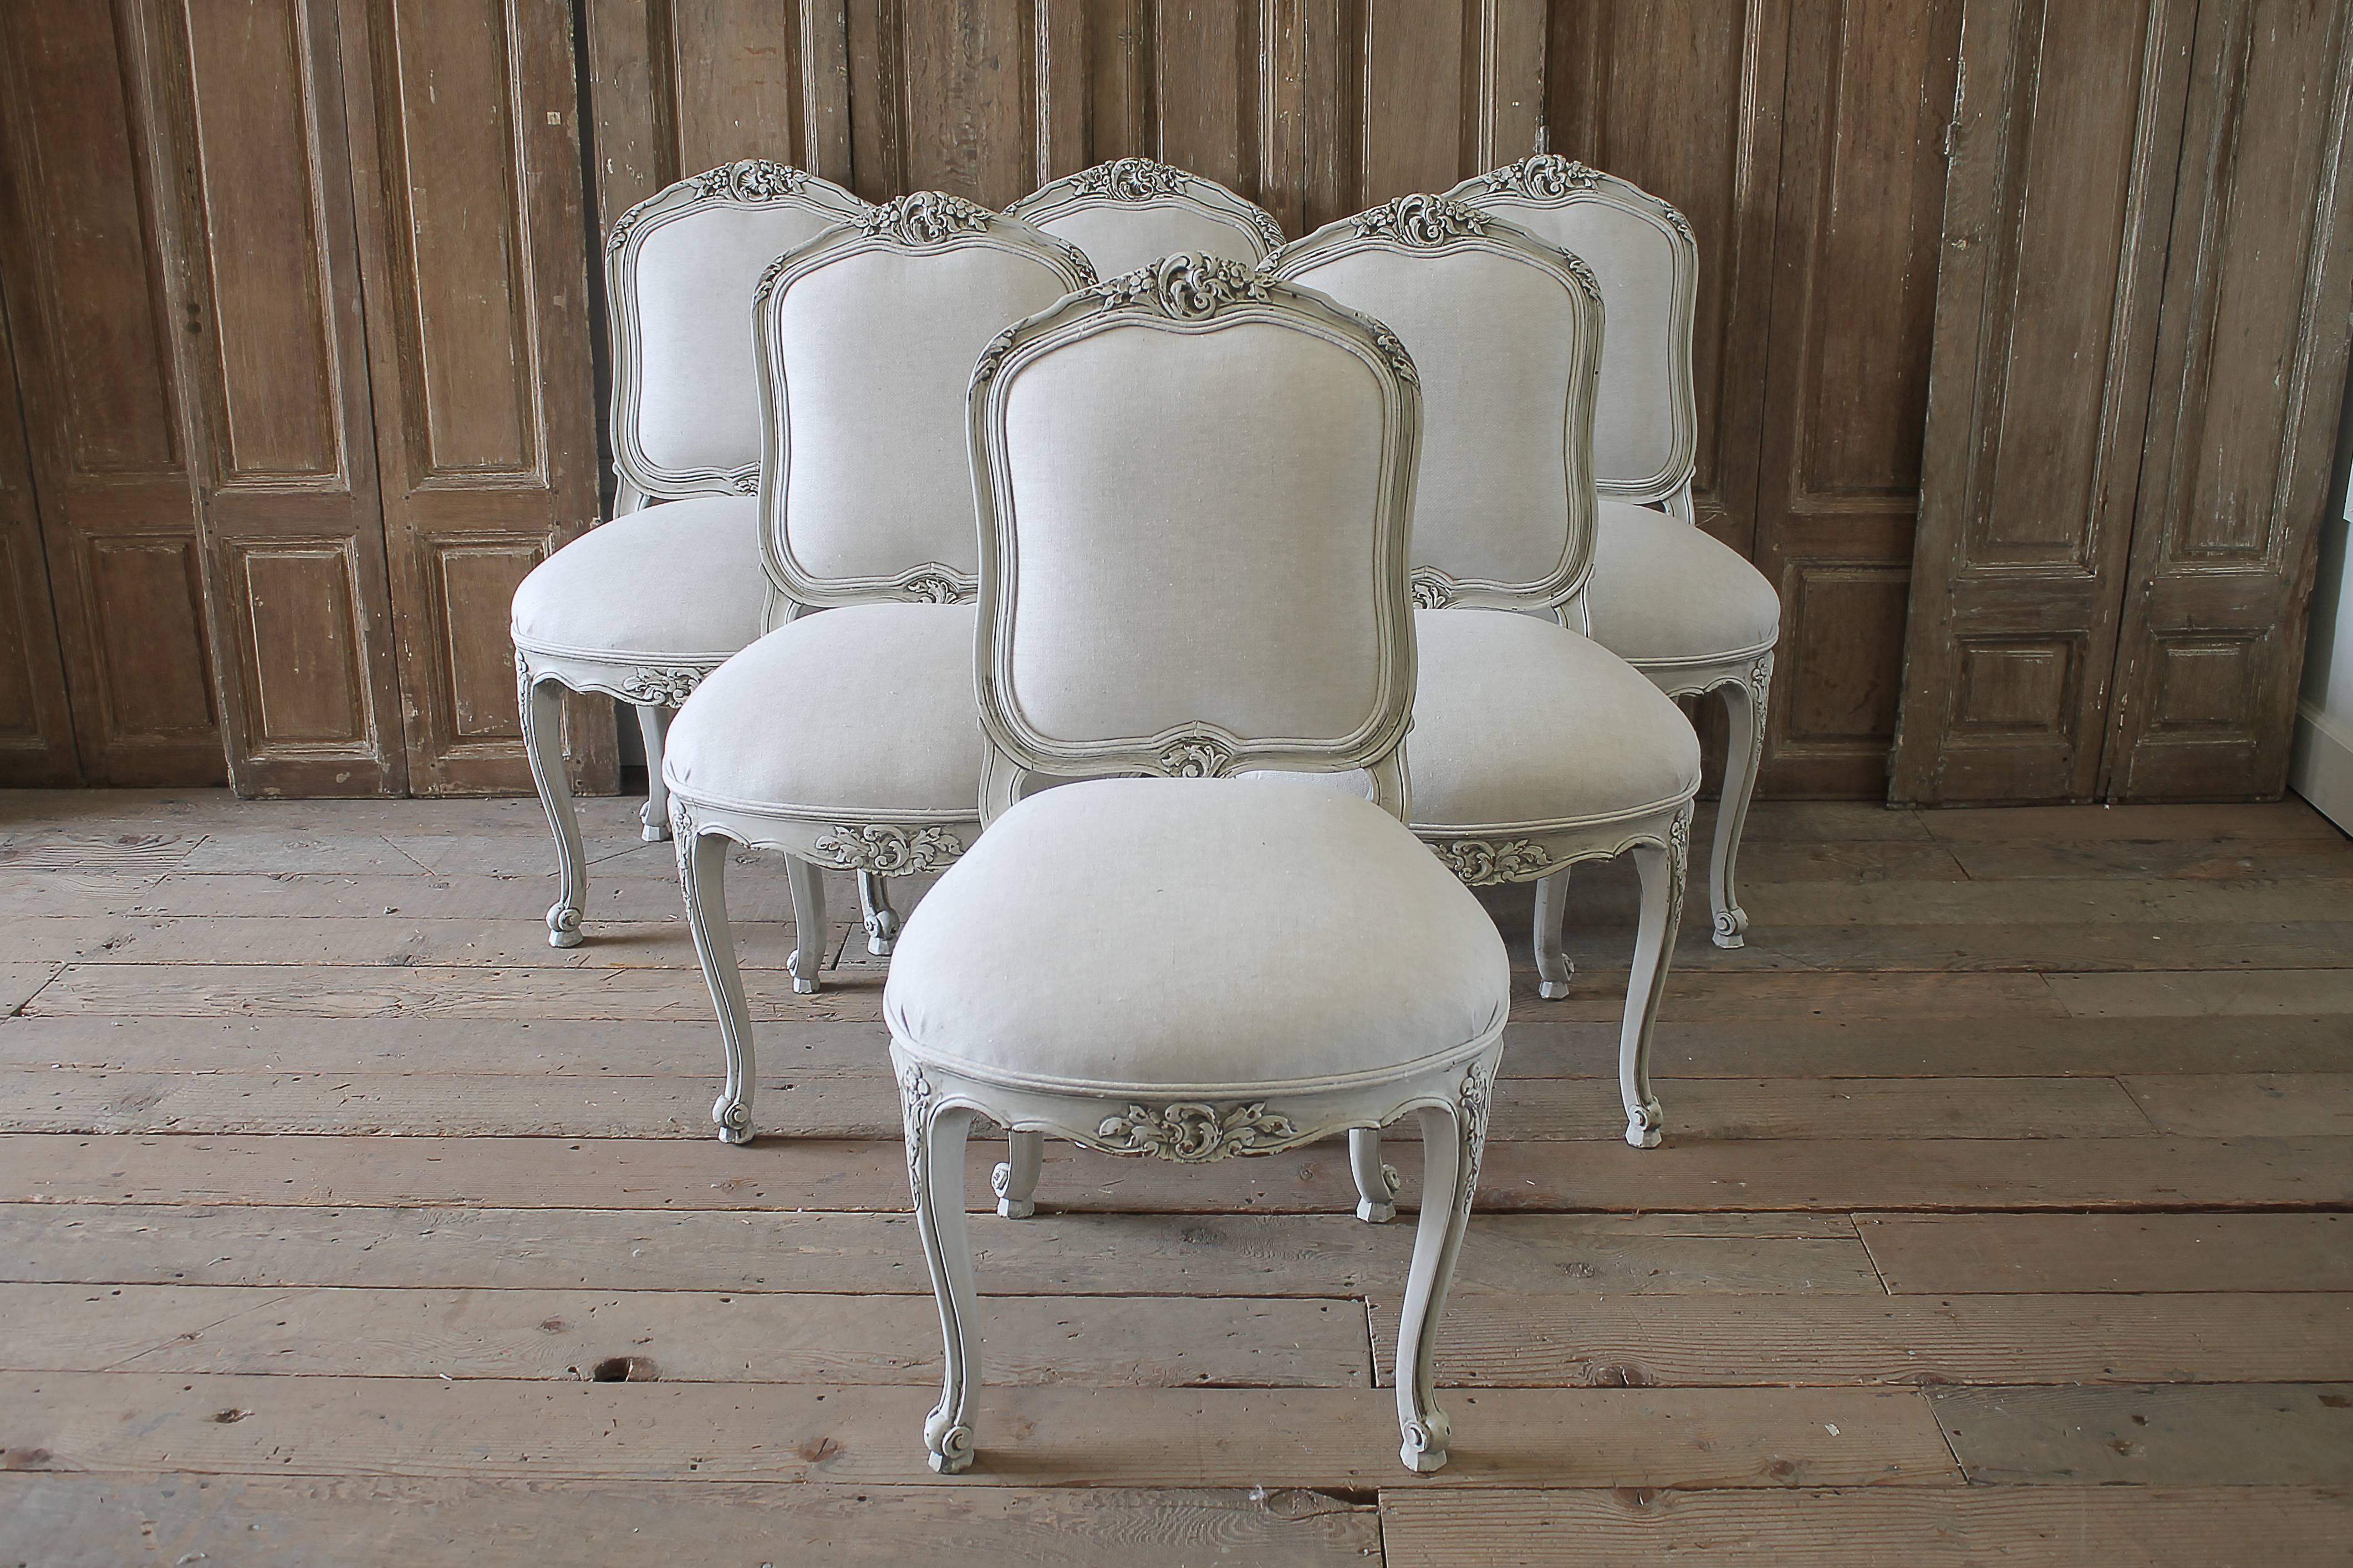 20th century set of six carved French dining chairs upholstered in Belgian linen
Painted in our oyster white, which is a true off-white with subtle distressed edges, and finished with an antique glazed patina.
A cartouche carving with trailing